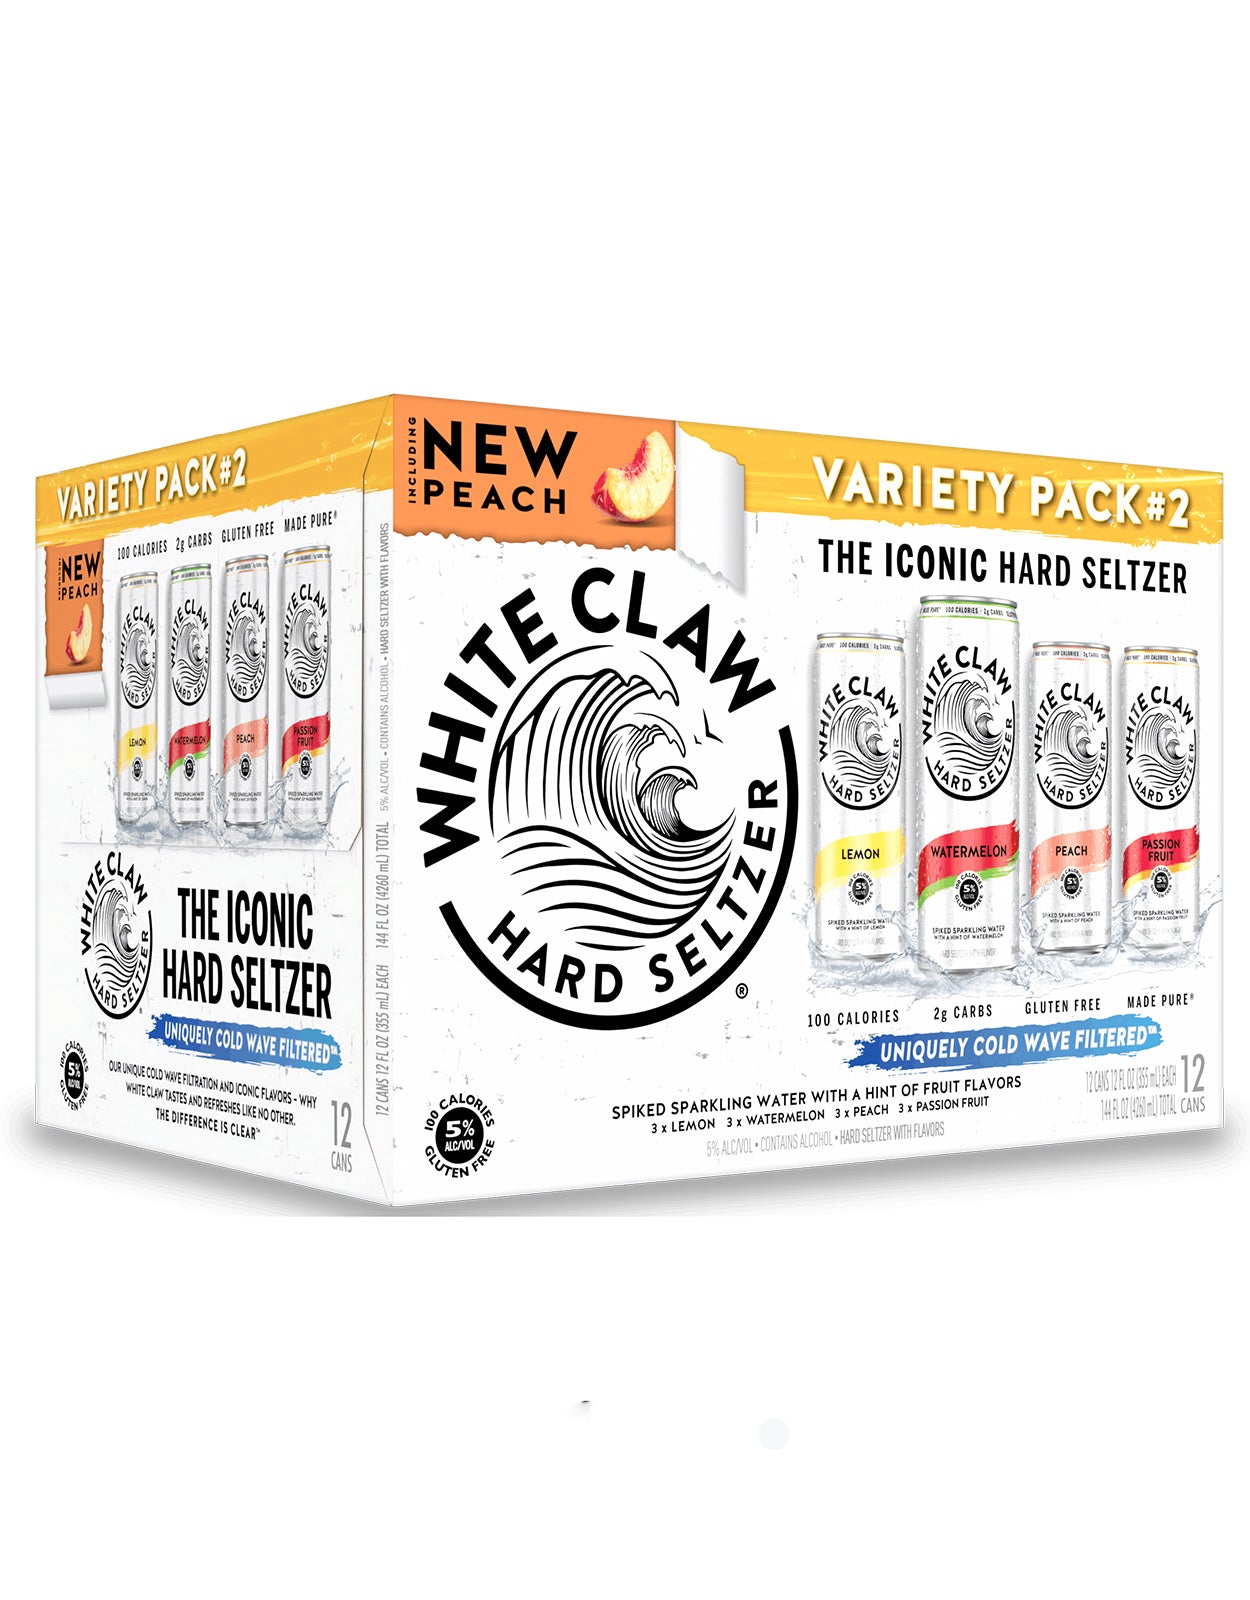 White Claw Variety Pack #2 355 ml - 12 Cans